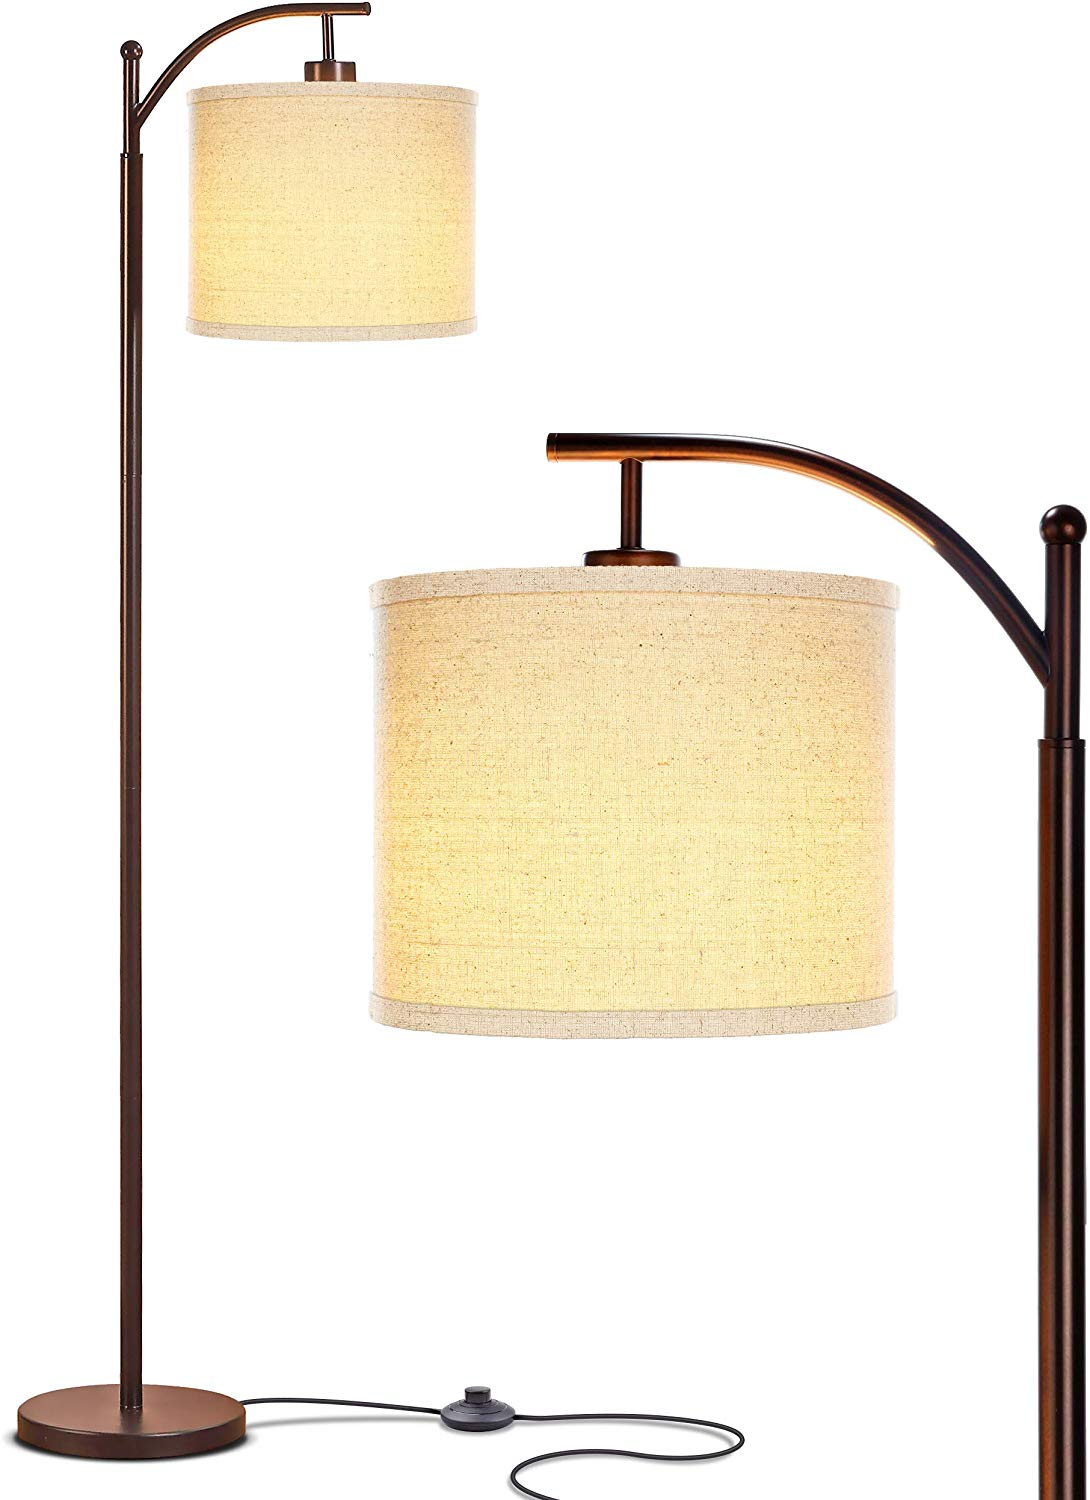 Miroco Led Floor Lamp With 5 Brightness Levels intended for proportions 1090 X 1500